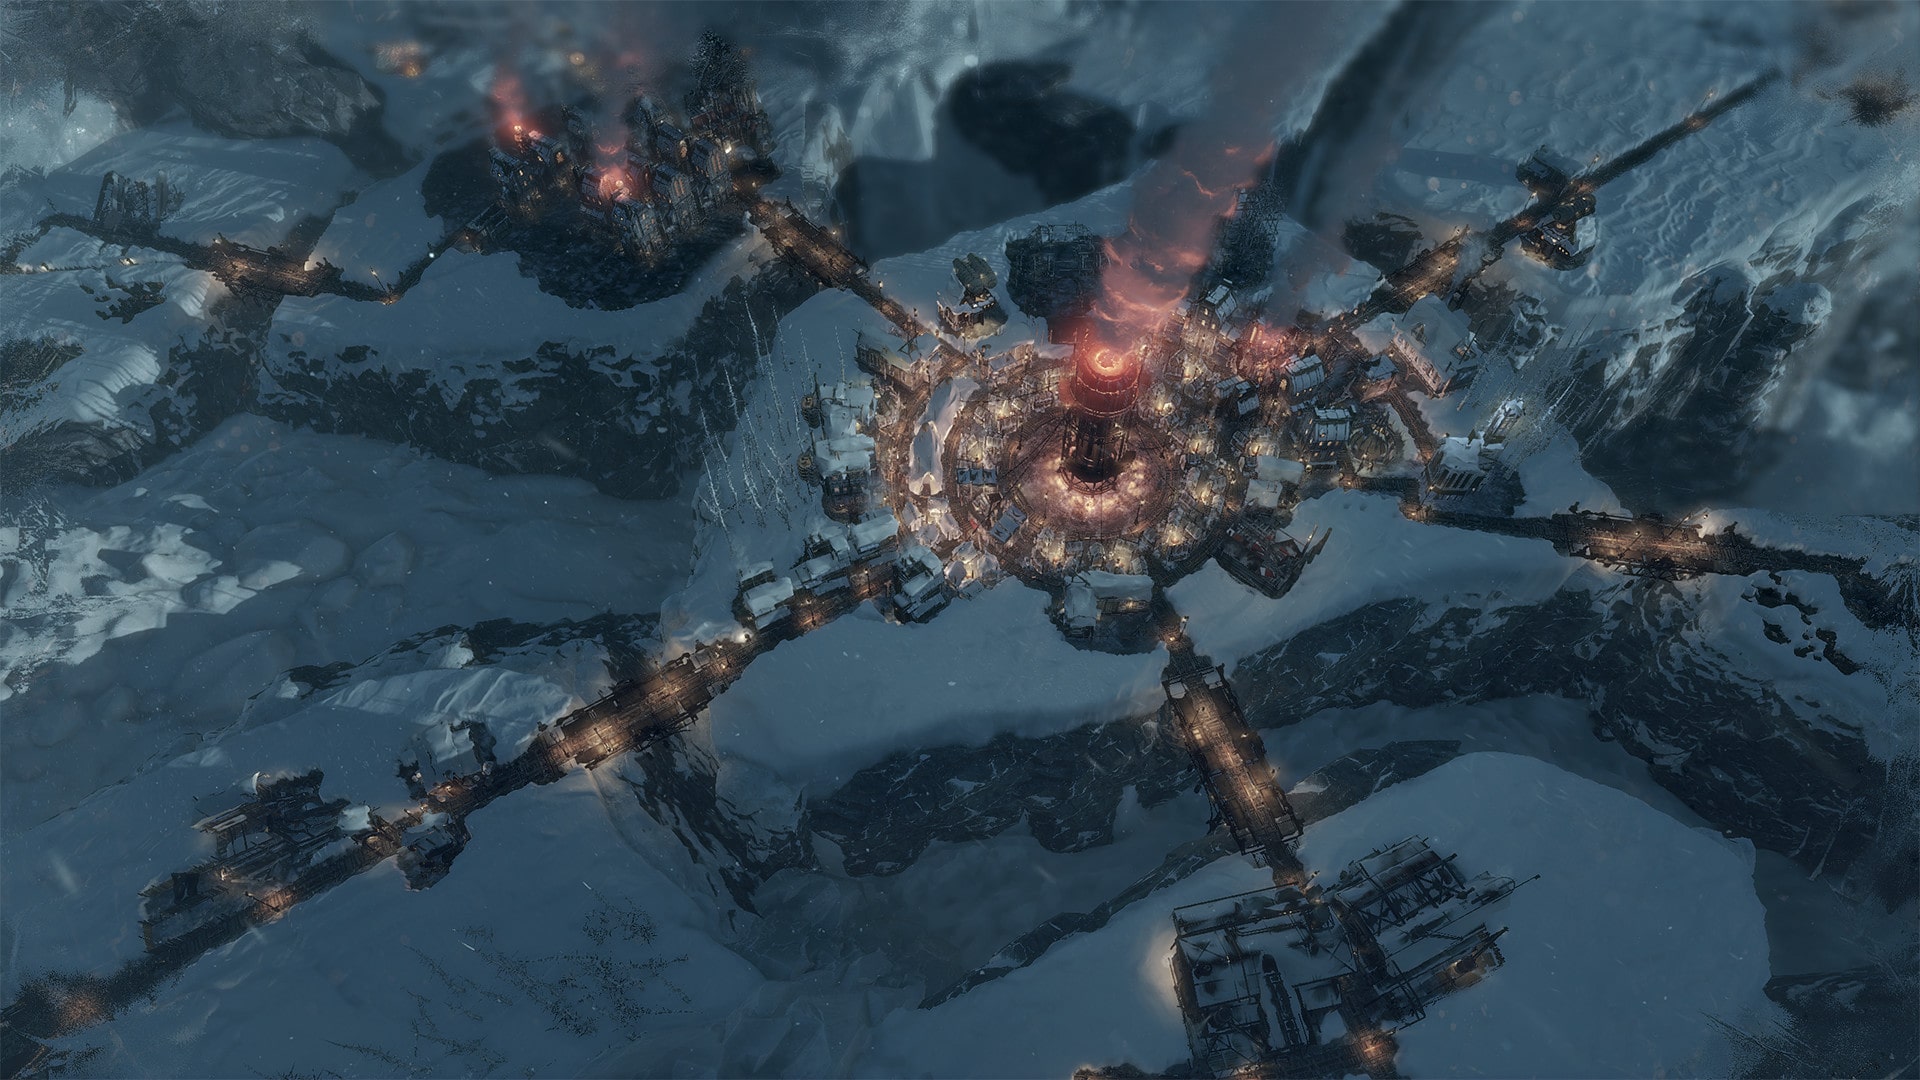 Artwork for Frostpunk's expansion 'The Rifts'